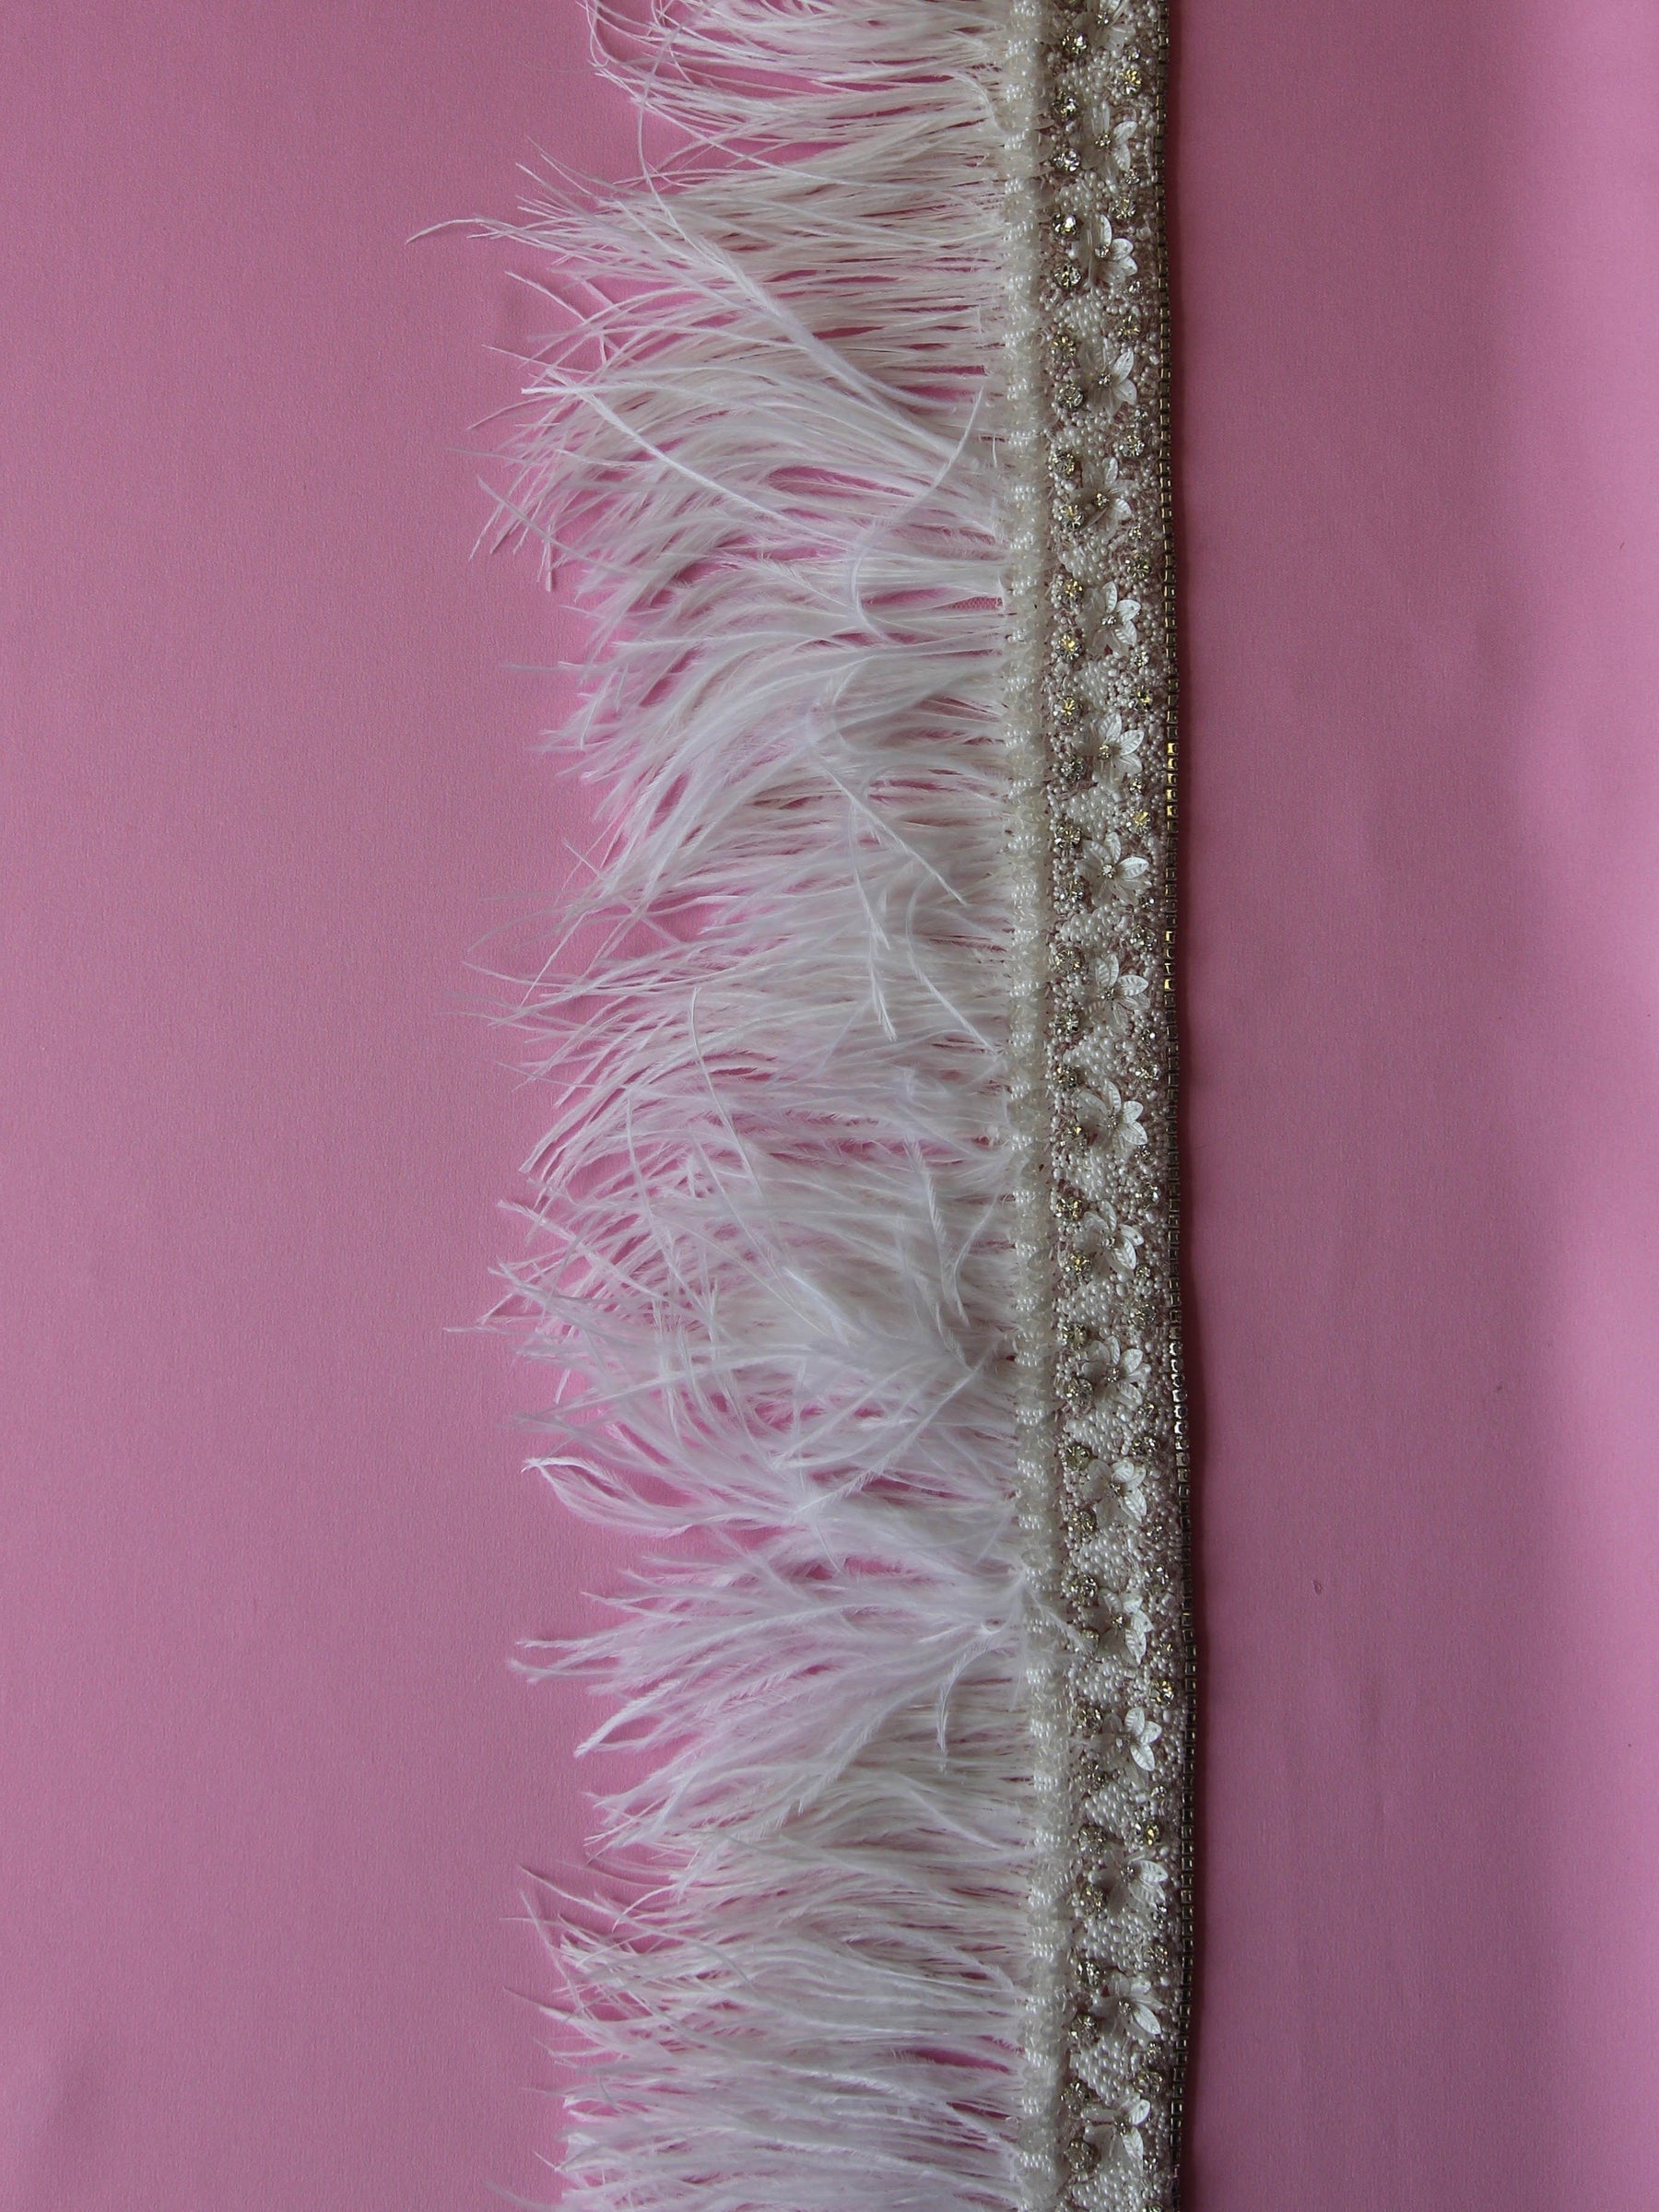  80 Pieces Ostrich Feathers Bulk Large Boho Feathers